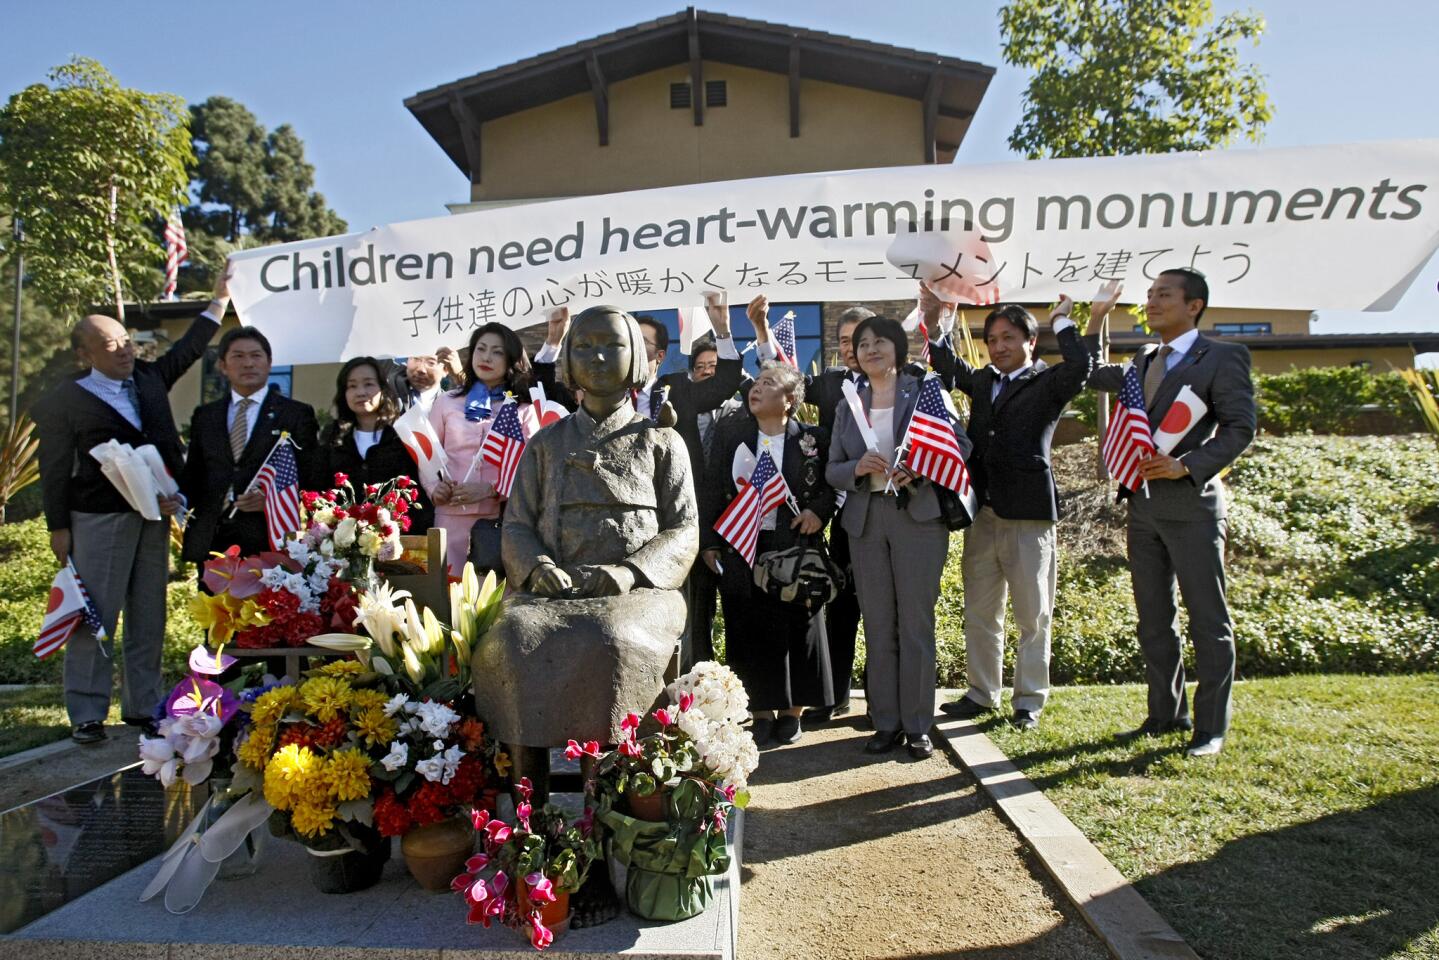 A delegation of Japanese city council members brought a sign that says "Children need heart-warming monuments" to the Comfort Women statue at Central Park in Glendale on Thursday, January 16, 2014. The delegation first delivered a letter to the Glendale city clerk asking this statue be removed because they do not approve of its message.